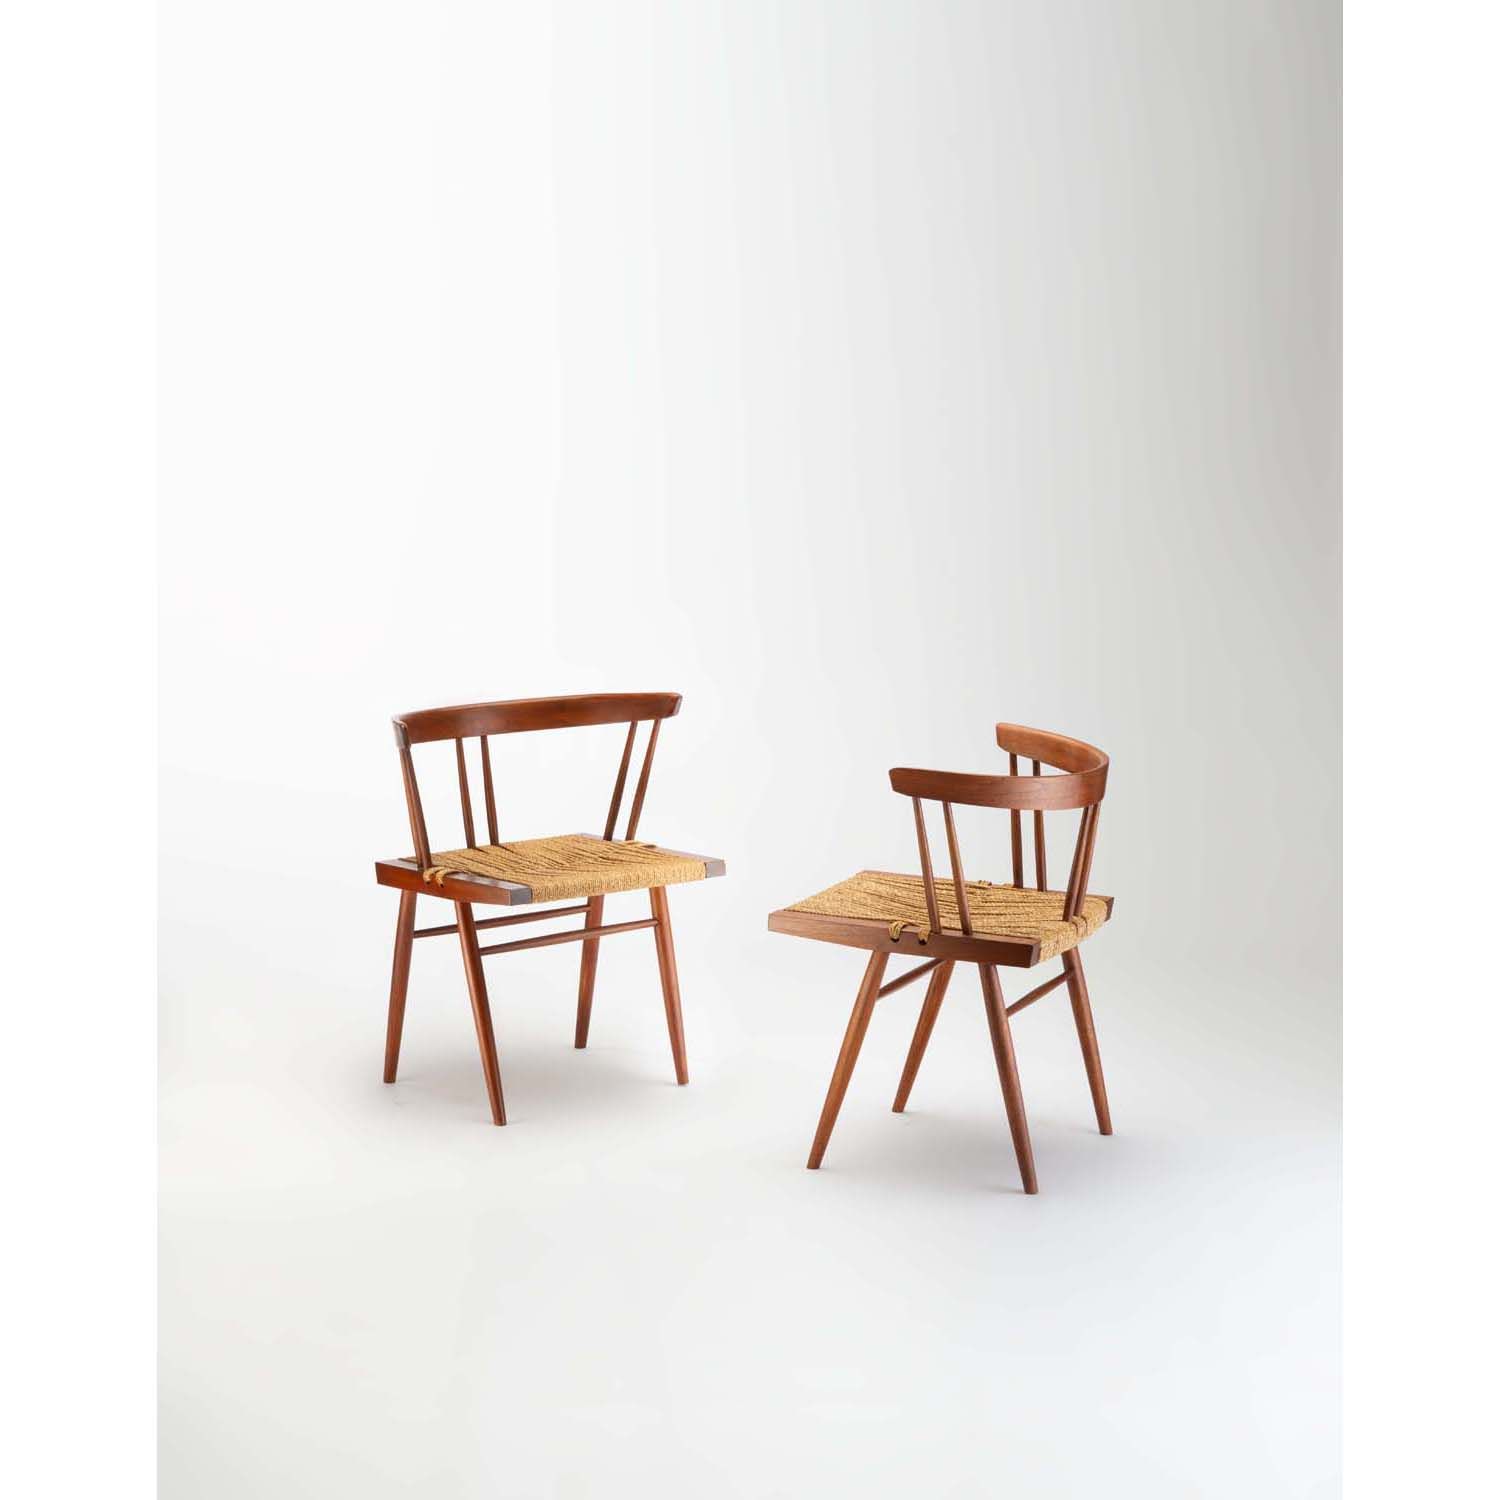 Null George Nakashima (1905-1990)
Pair of 'Seagrass' chairs
Walnut and seagrass
&hellip;